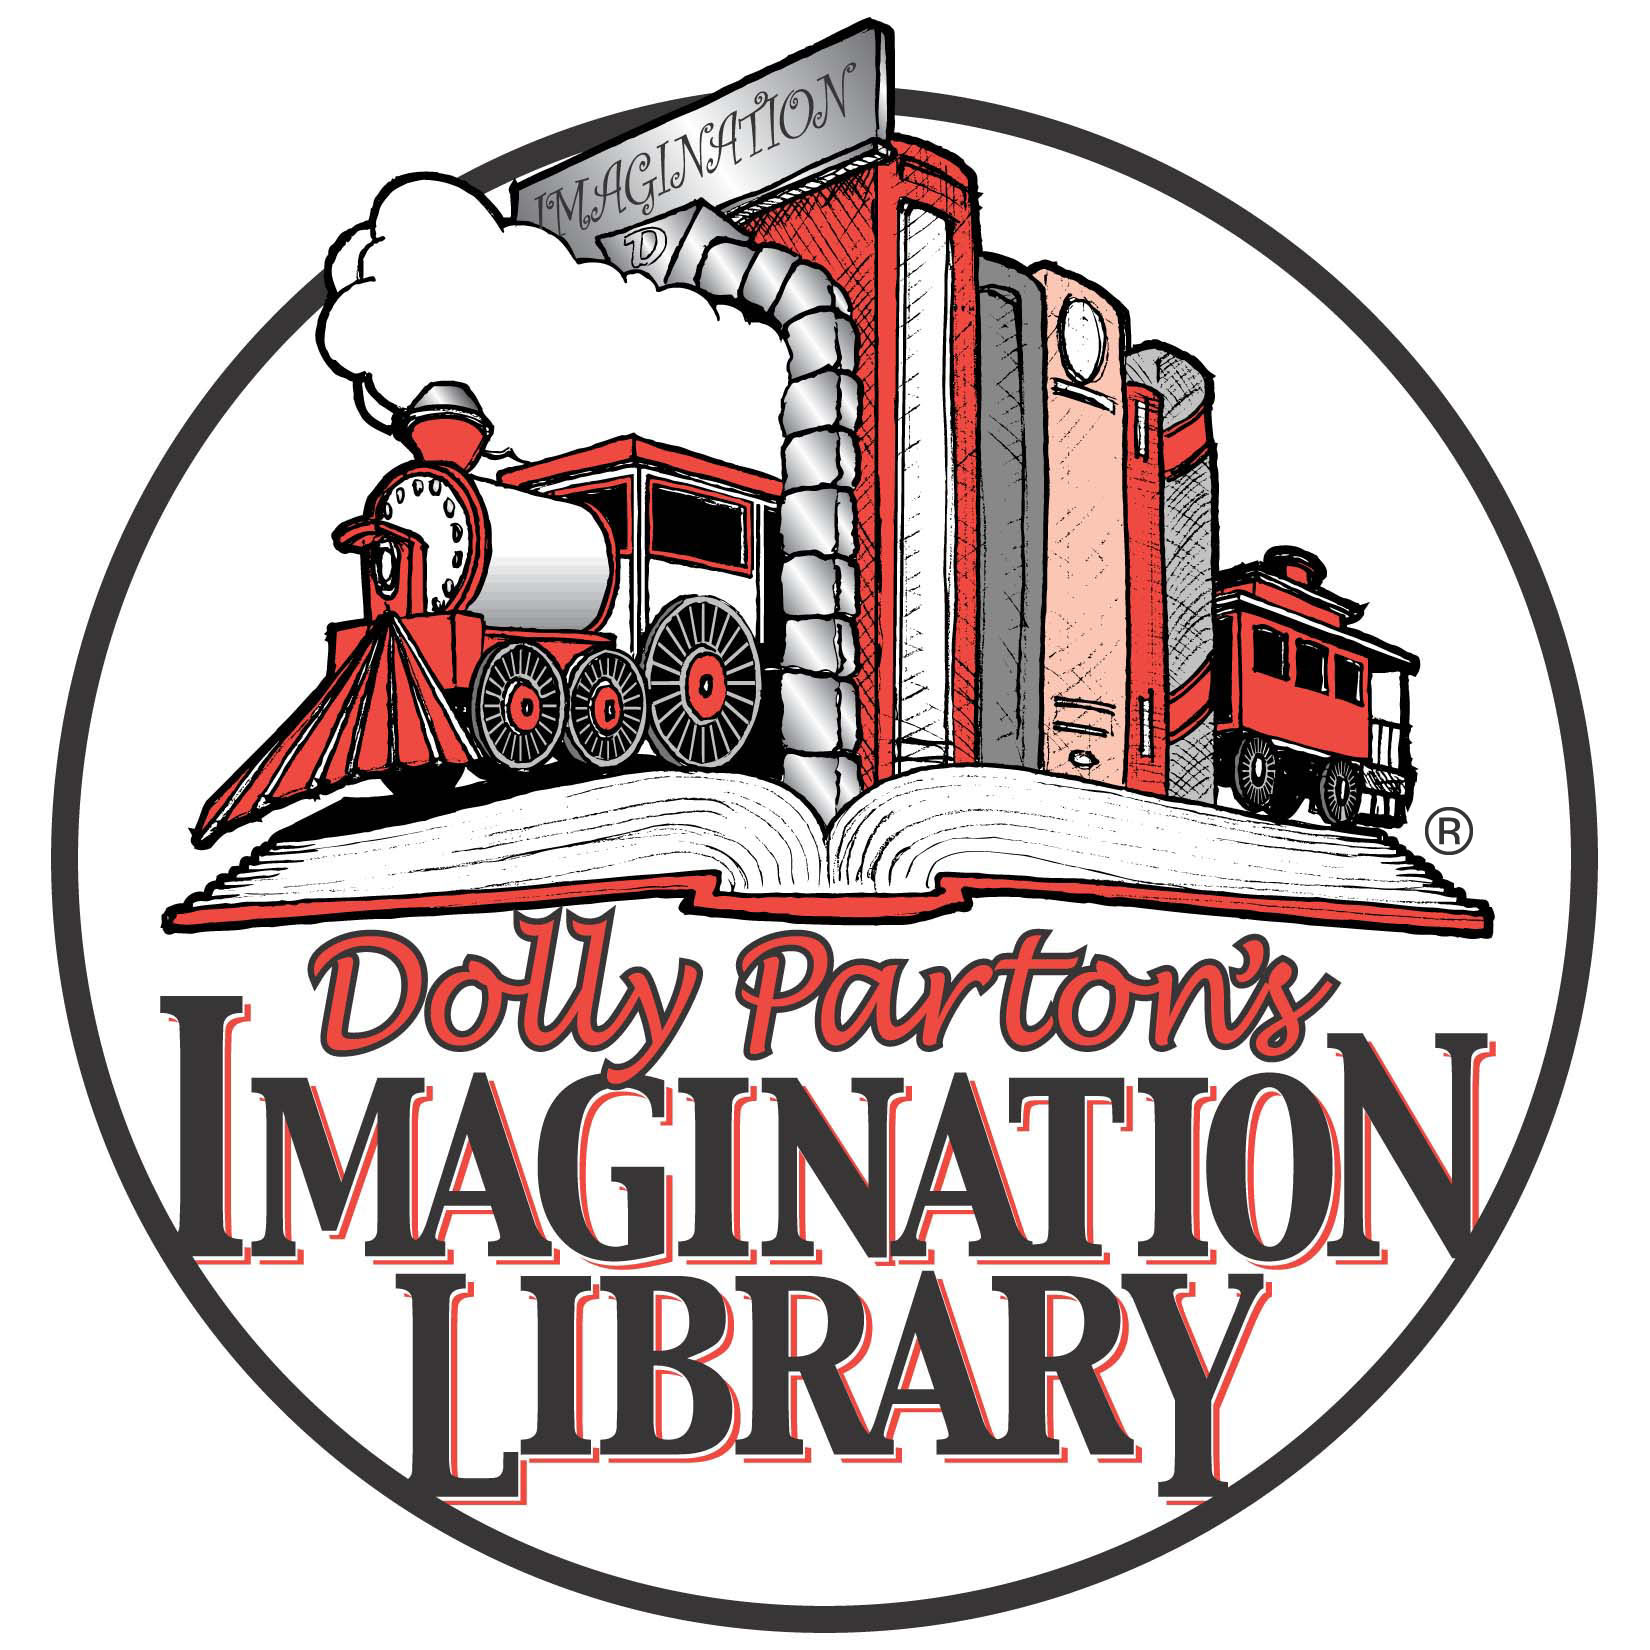 1a imagination library